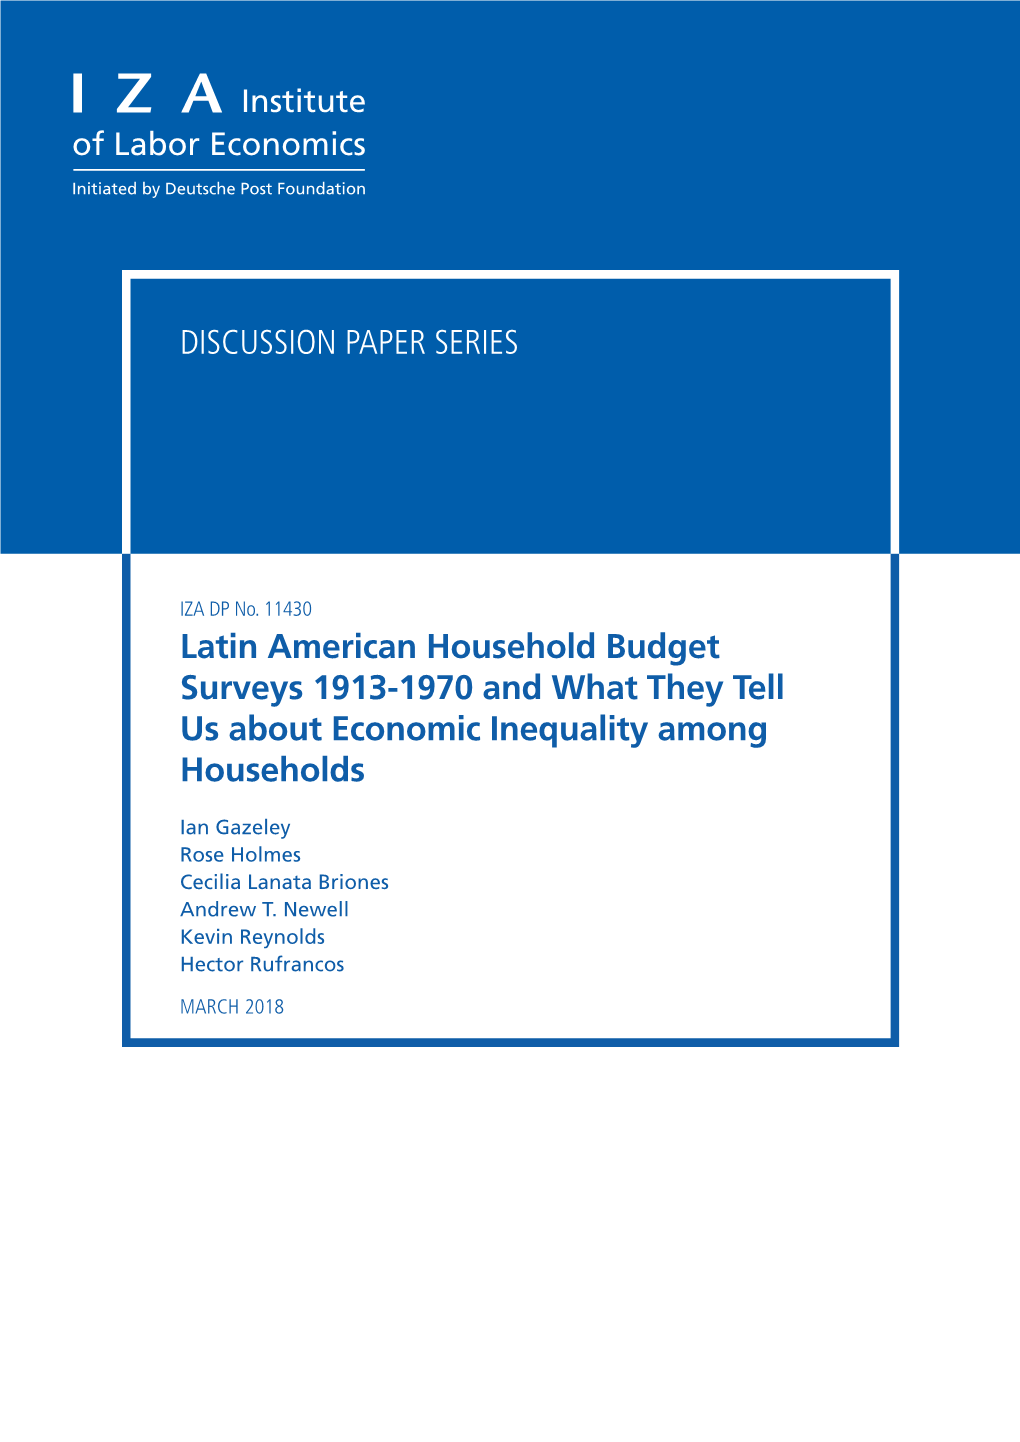 Latin American Household Budget Surveys 1913-1970 and What They Tell Us About Economic Inequality Among Households